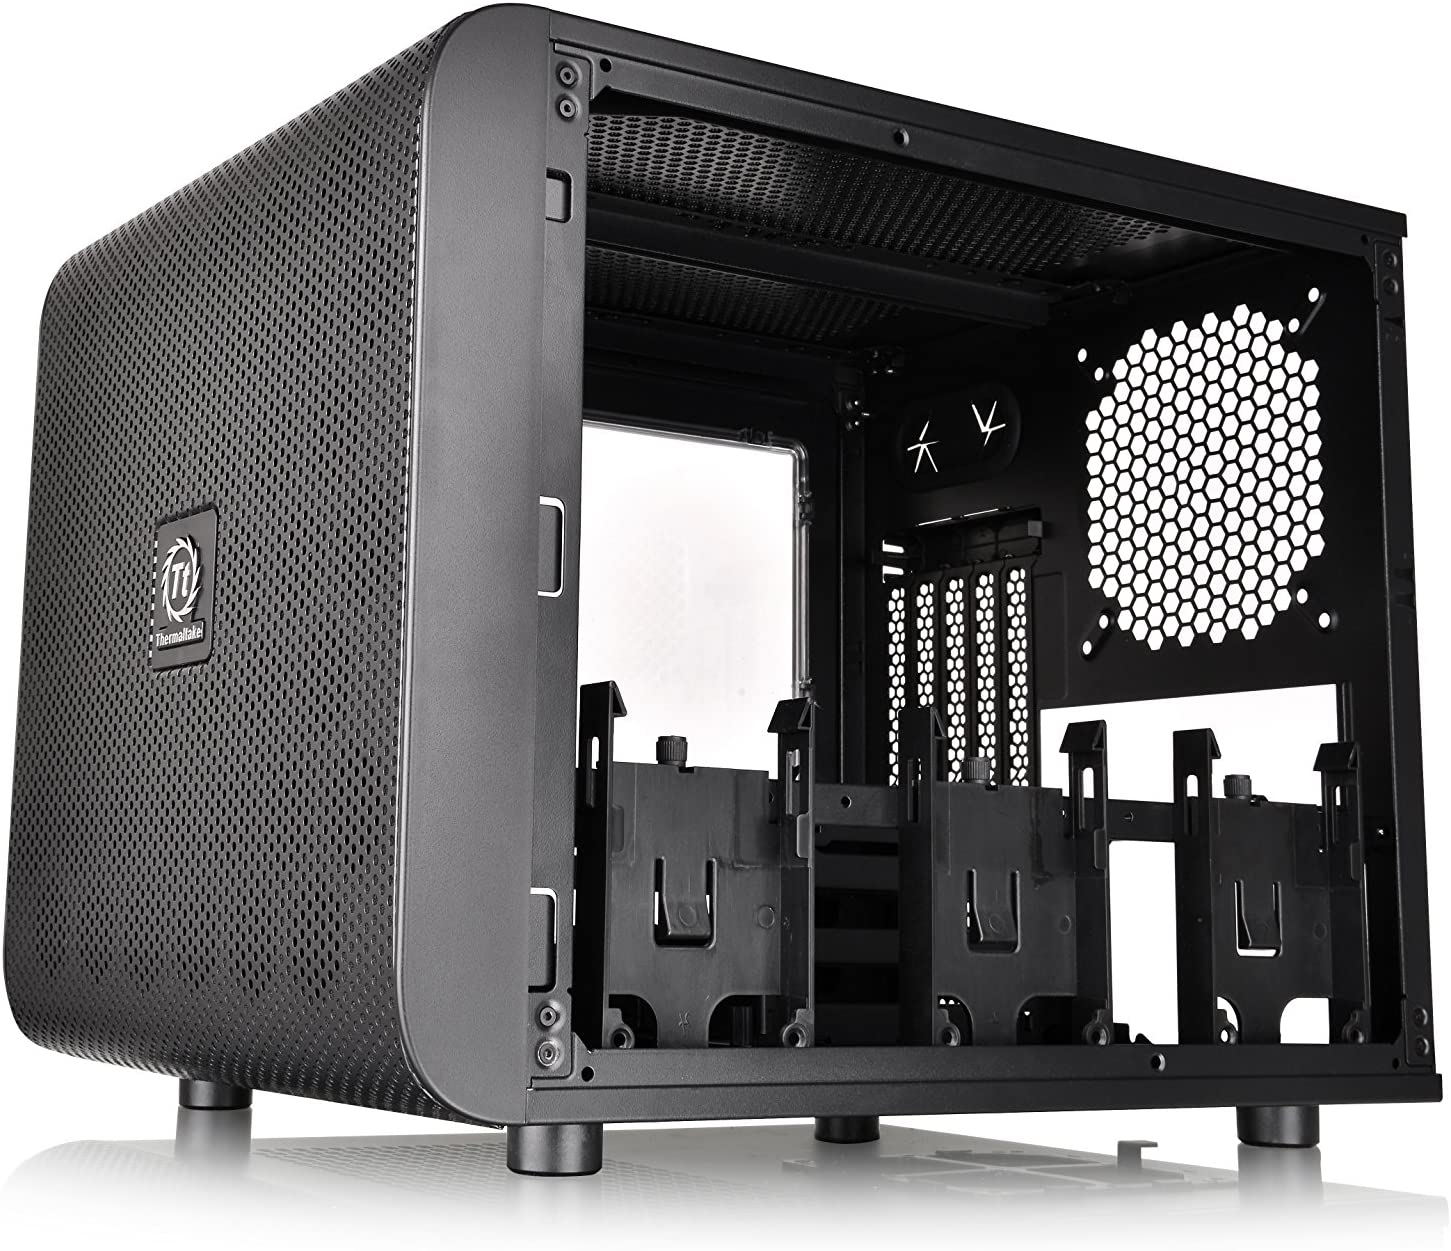 Thermaltake Core V21 SPCC Micro ATX, Mini ITX Cube Gaming Computer Case Chassis, Small Form Factor Builds, 200Mm Front Fan Pre-Installed, CA-1D5-00S1WN-00 Black